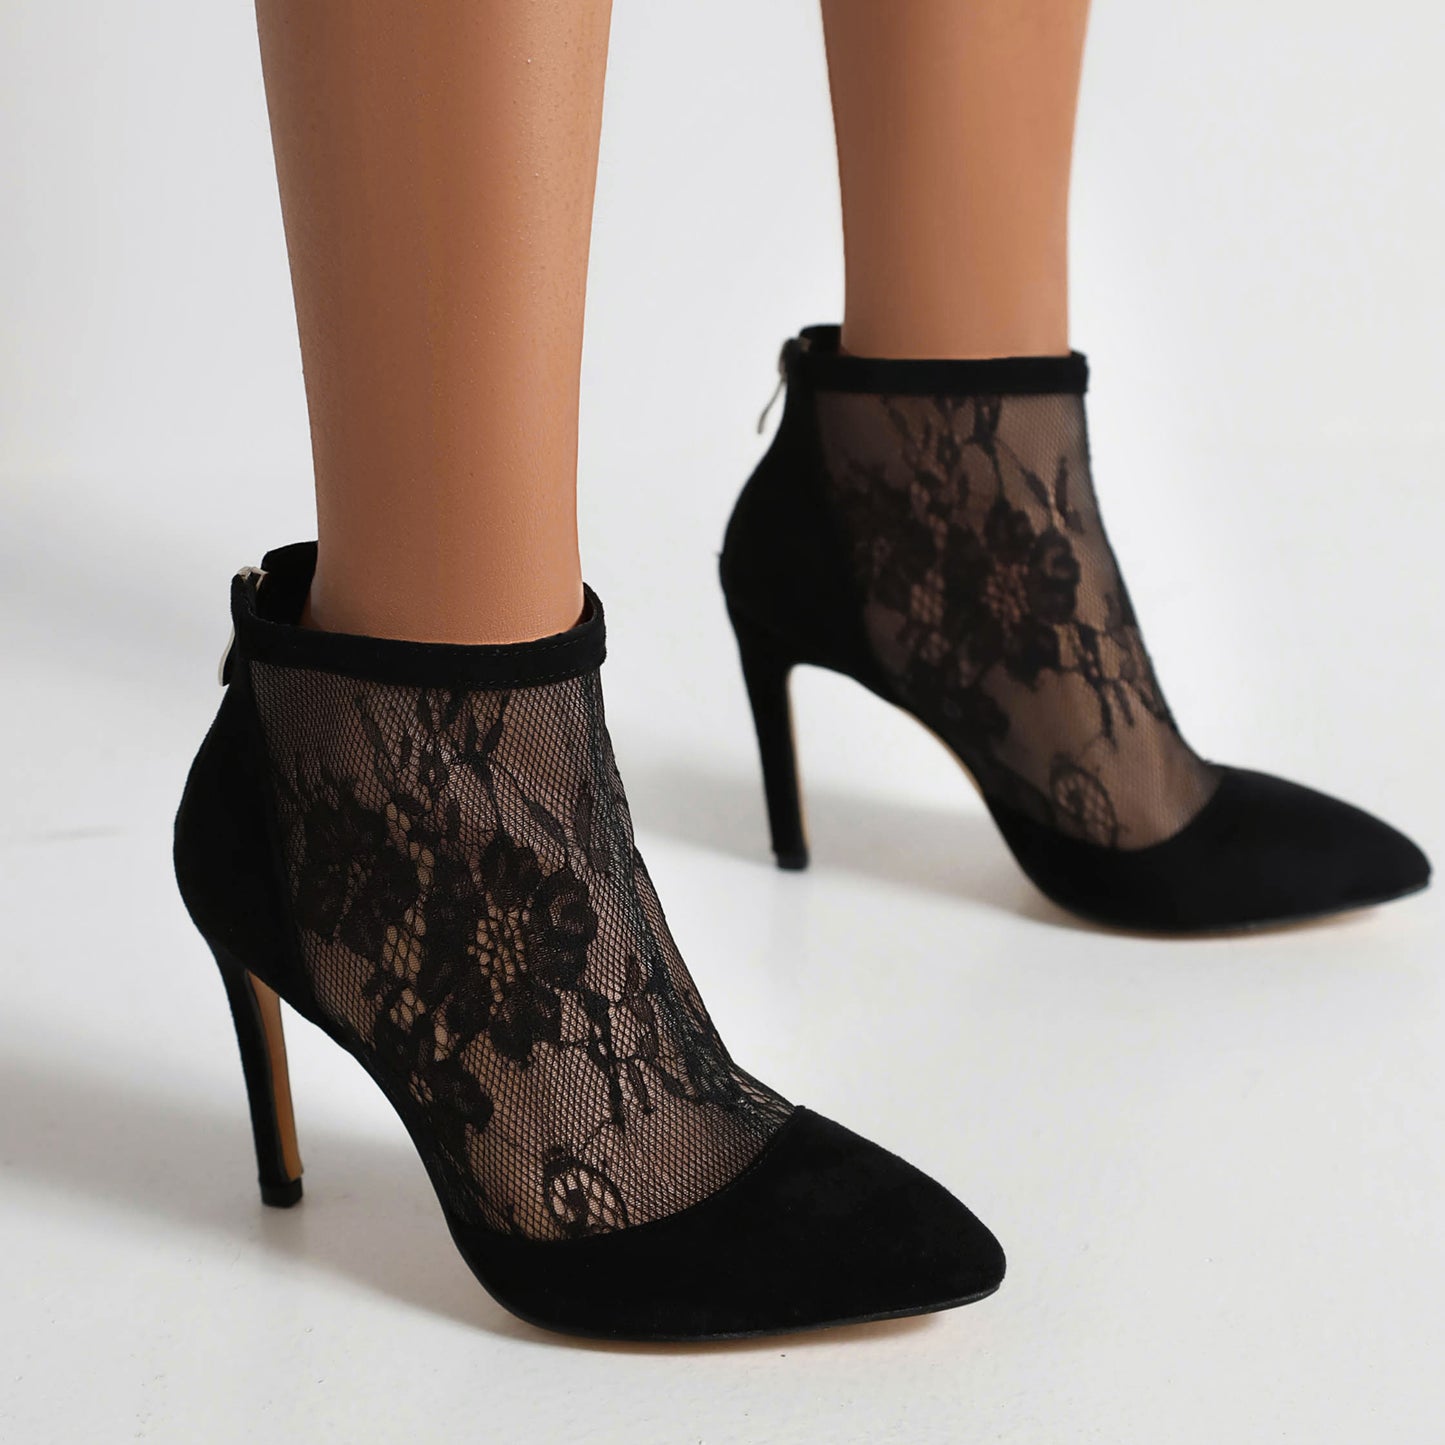 Women's Pointed Toe Lace Back Zippers Stiletto Heel Ankle Boots